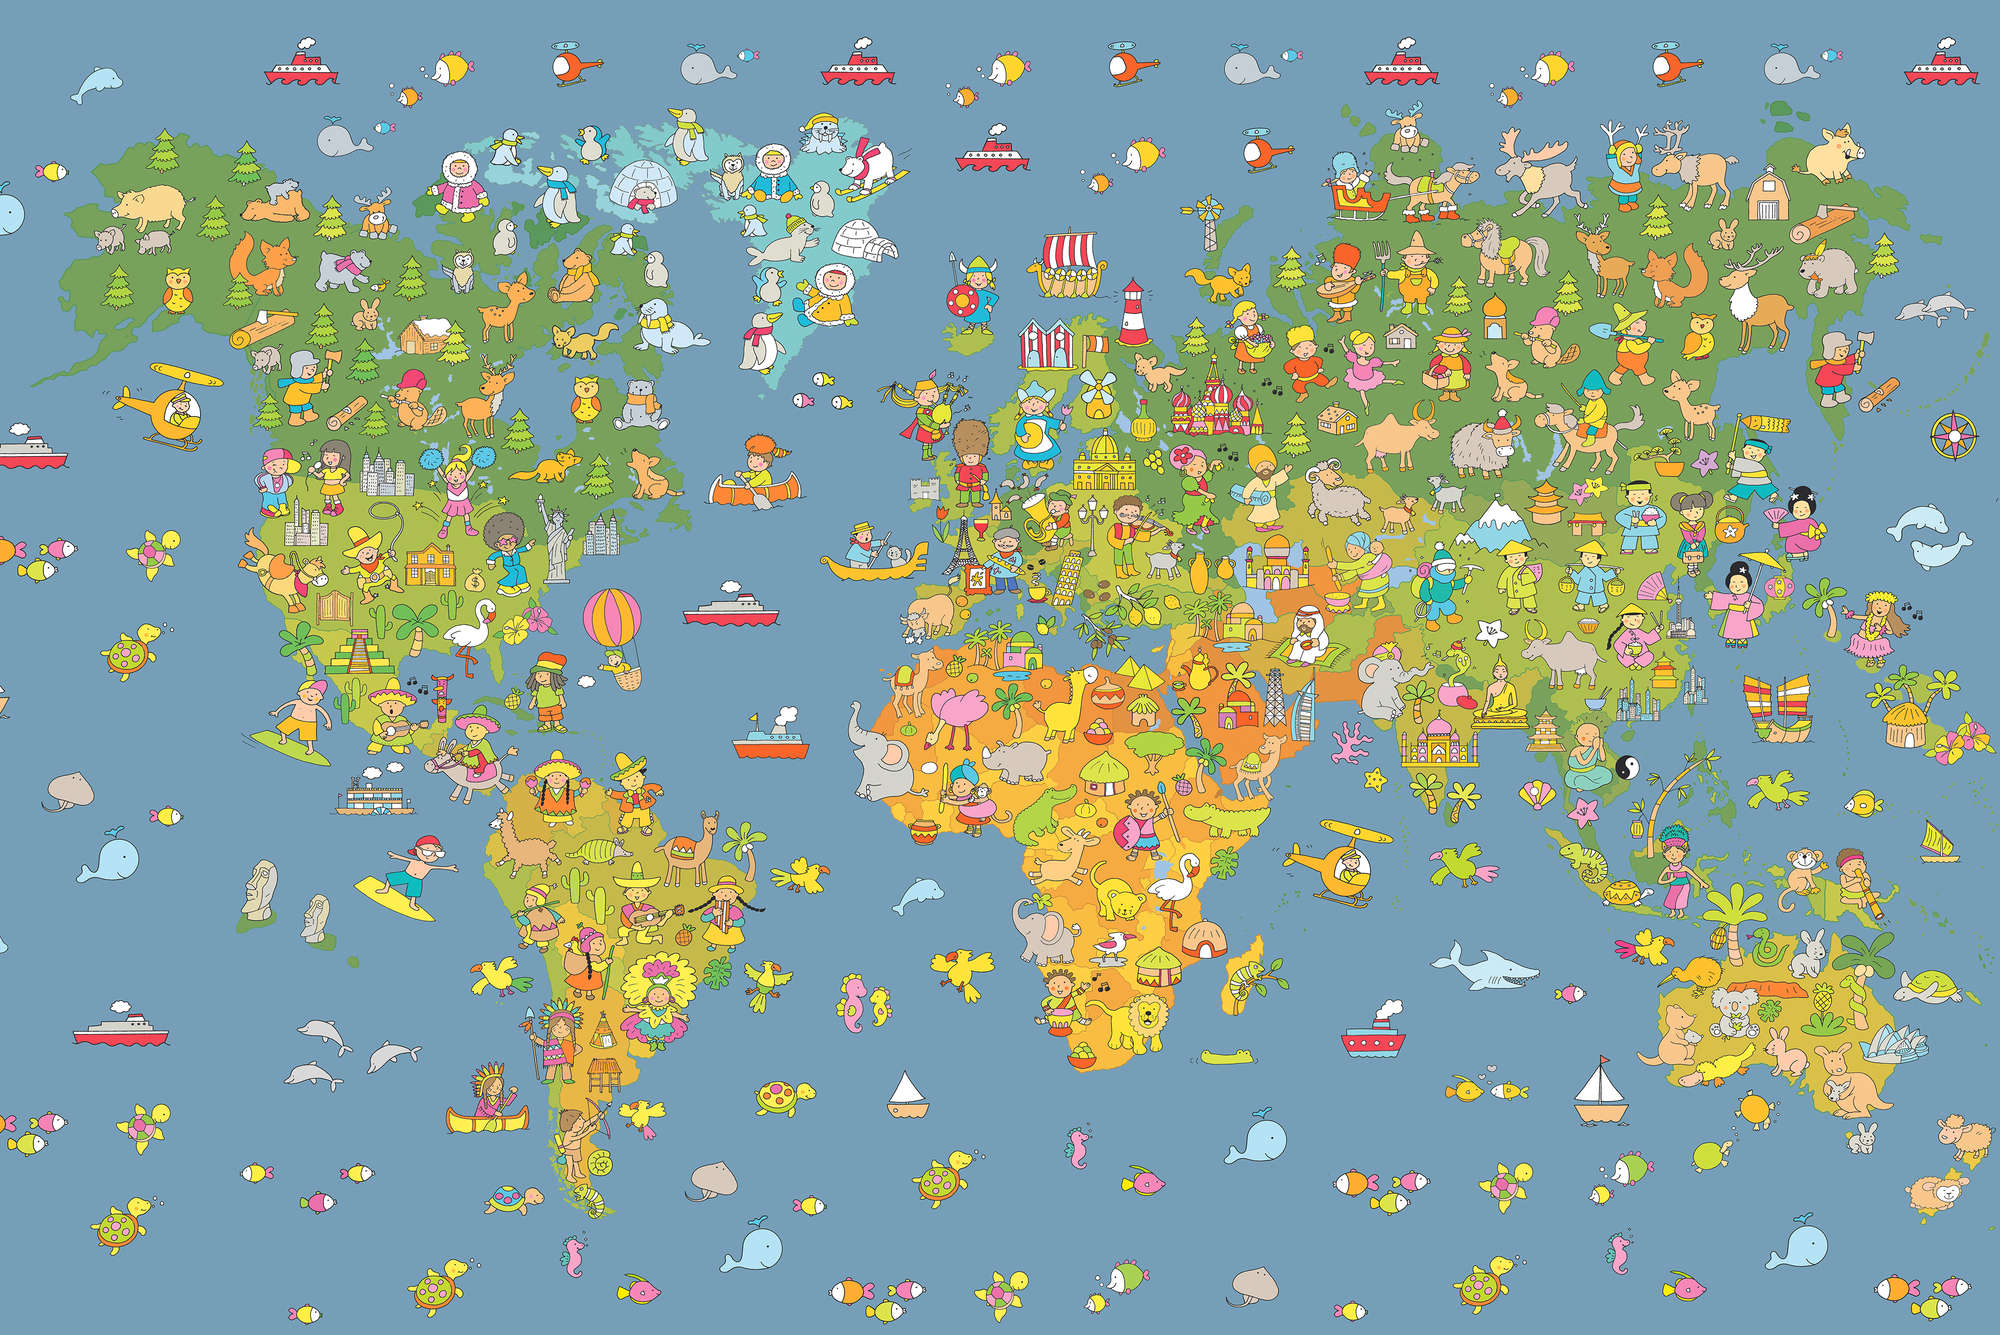             Kids mural world map with country symbols on textured non-woven fabric
        